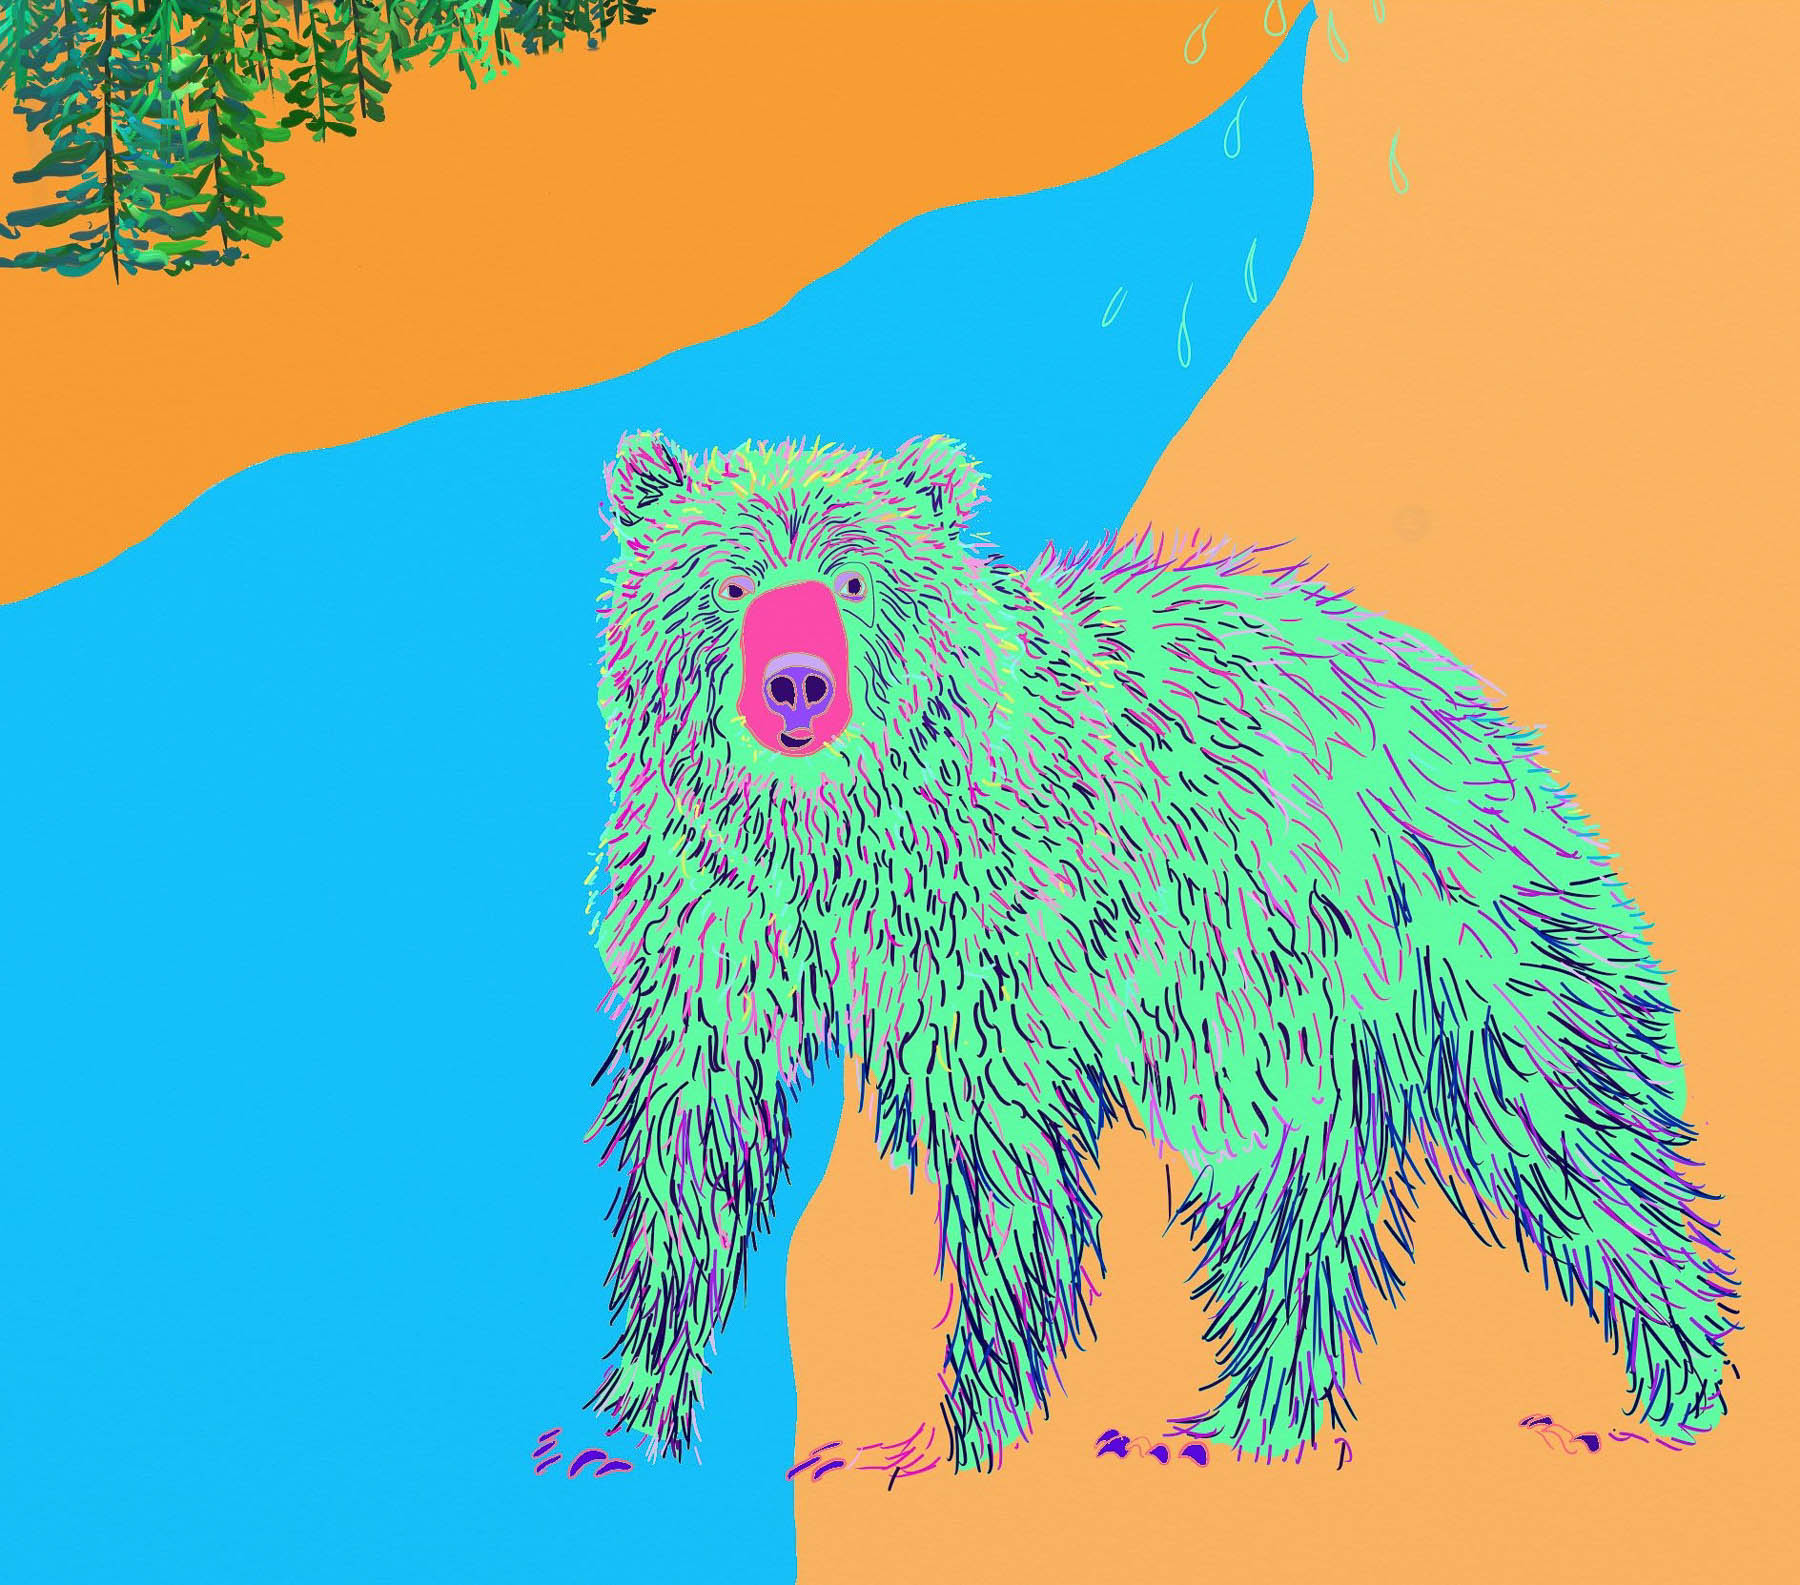 An illustration of a bear with bright teal fur.